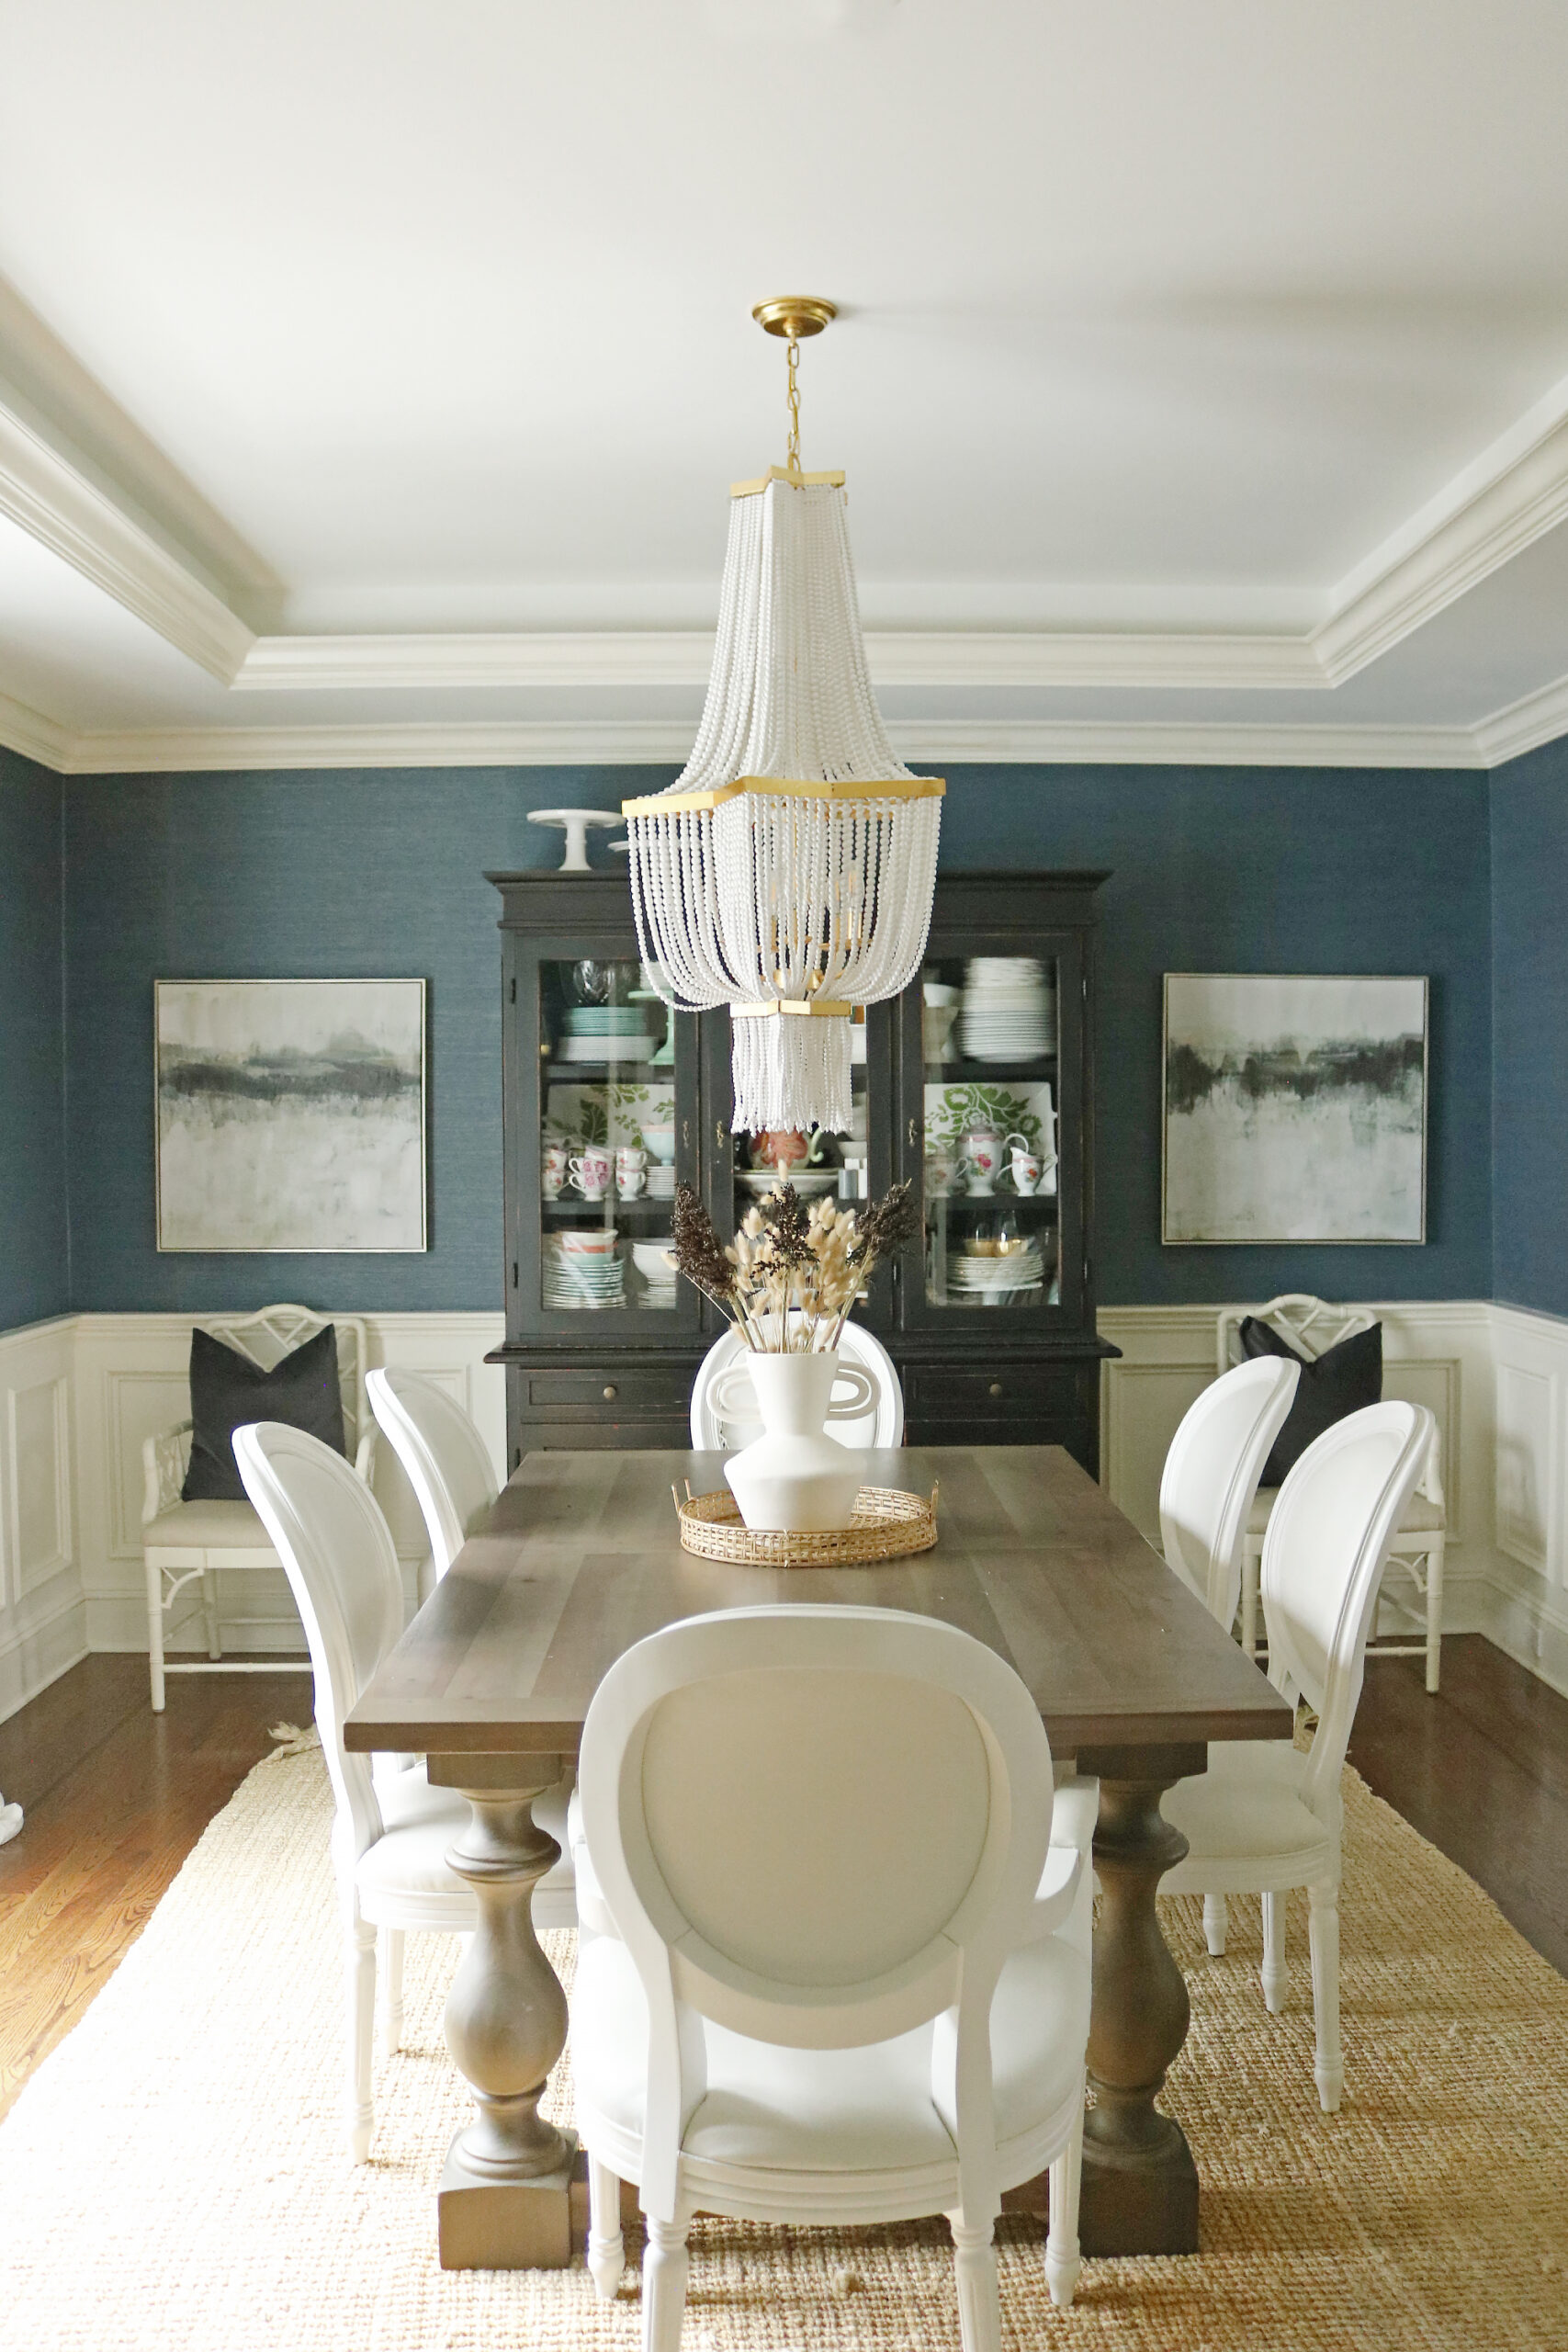 From Muddy Brown to Moody Blues, Our Dining room before and after makes small changes for a big difference and updated stylish look. || Darling Darleen Top CT Lifestyle Blogger